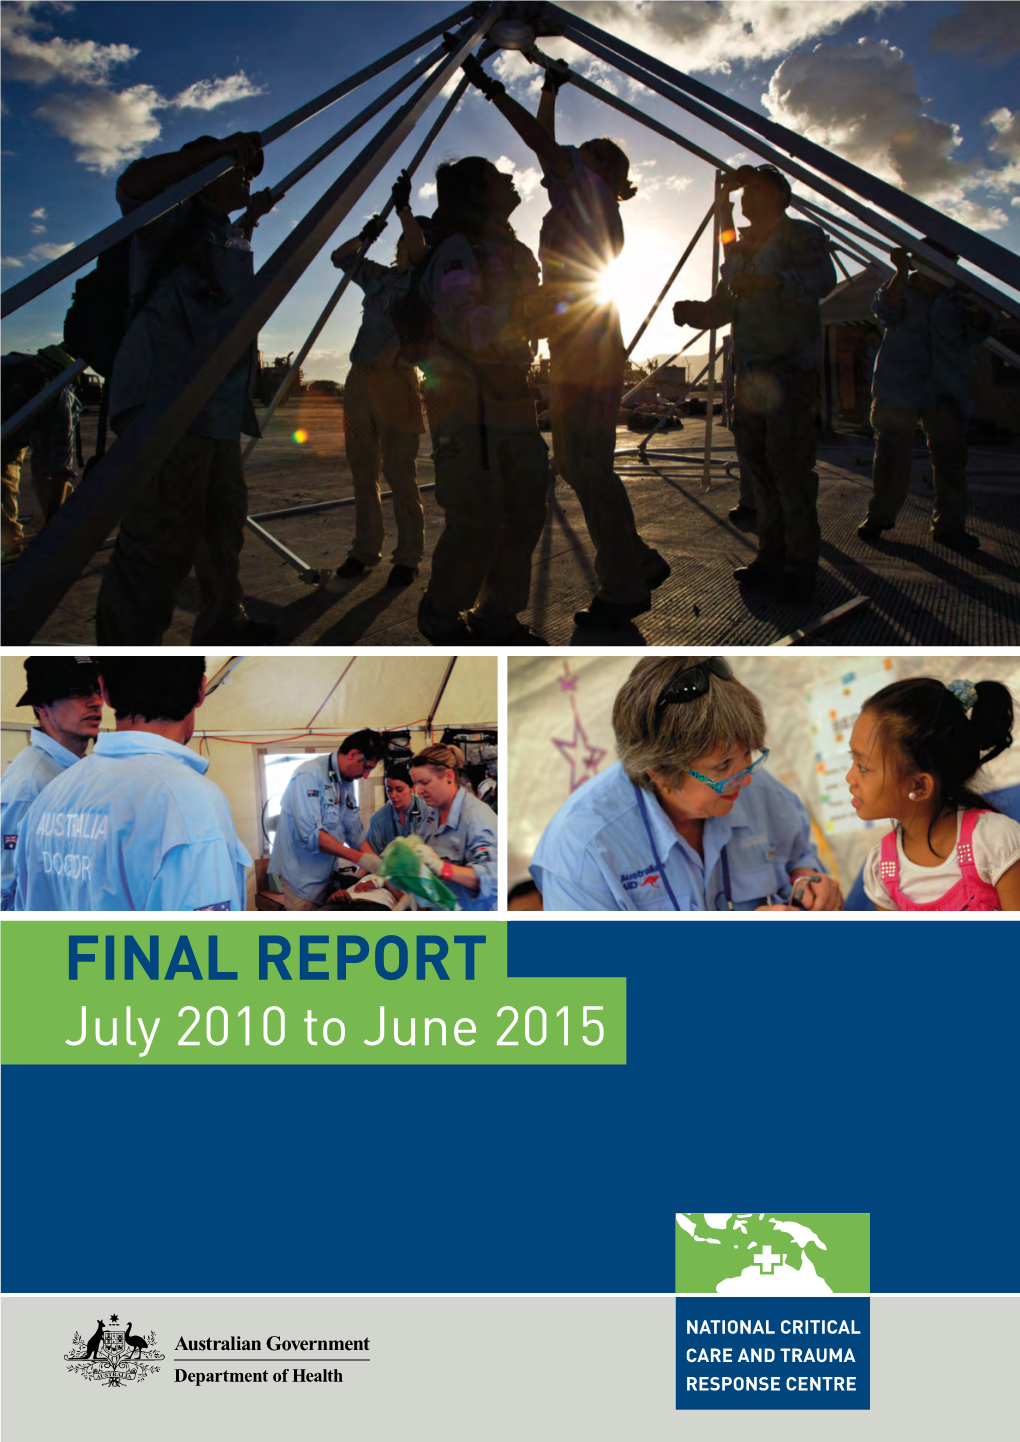 FINAL REPORT July 2010 to June 2015 Final Report July 2010 to June 2015 Final Report July 2010 to June 2015